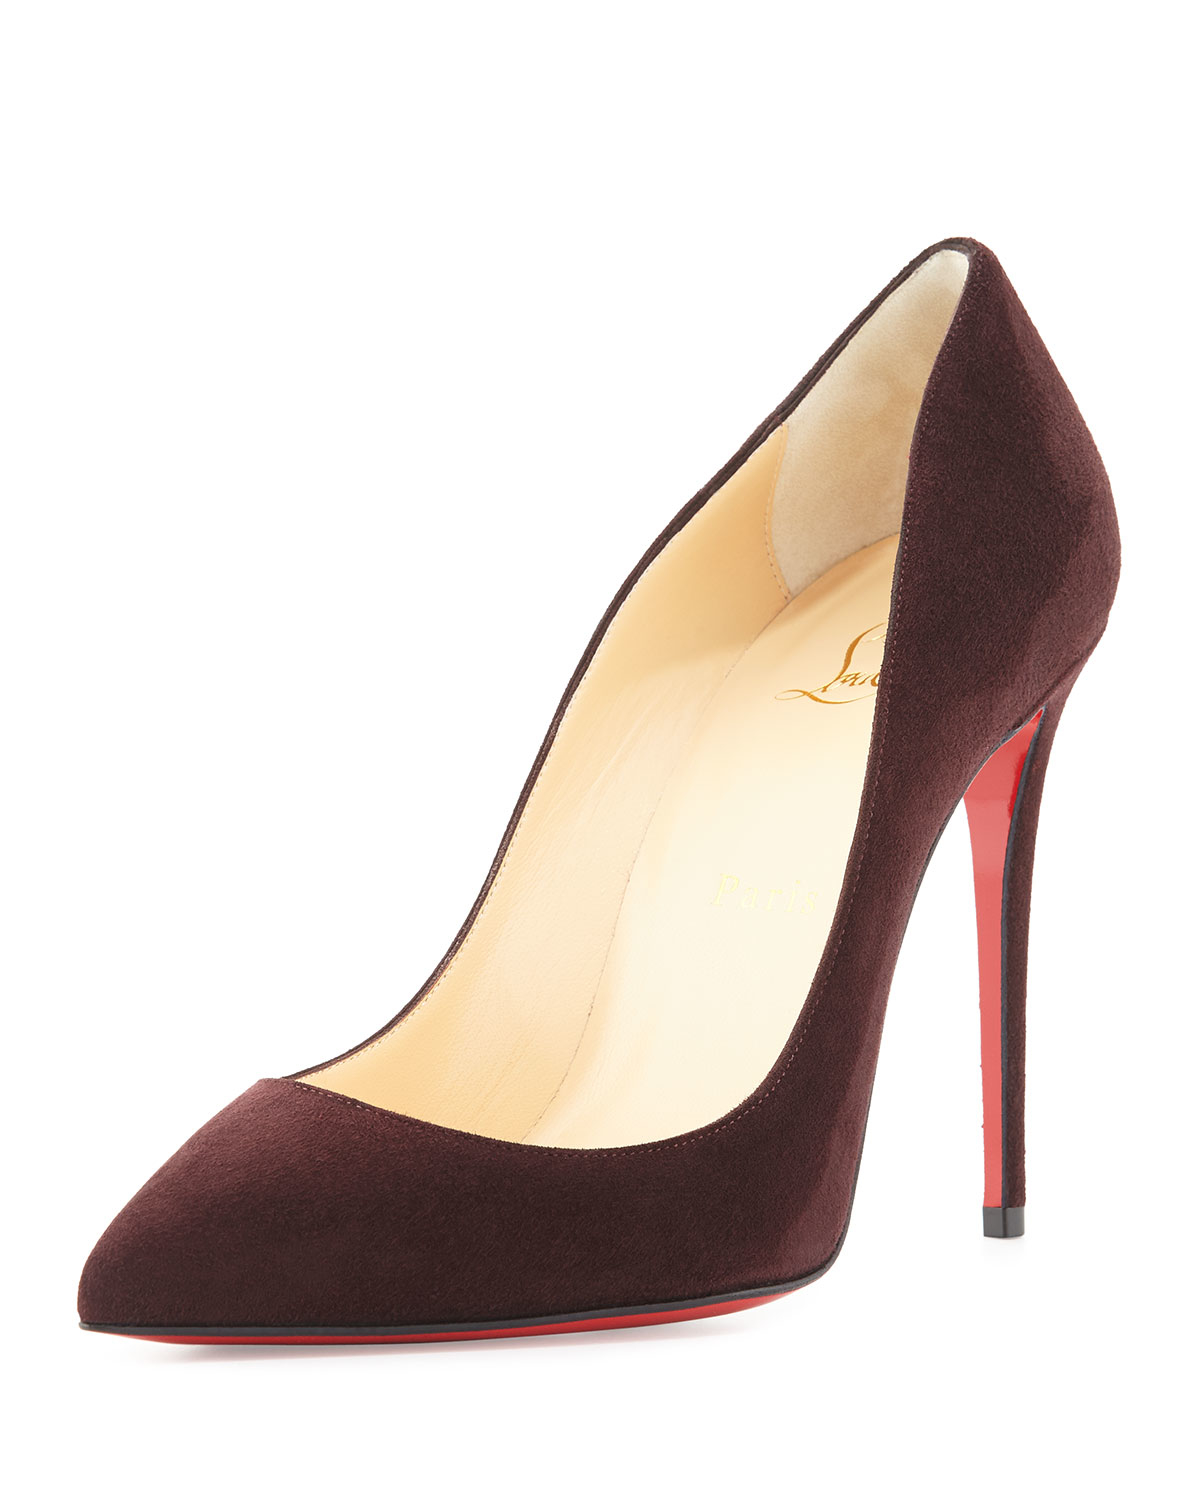 christian louboutin pumps Purple suede pointed toes | The Little ...